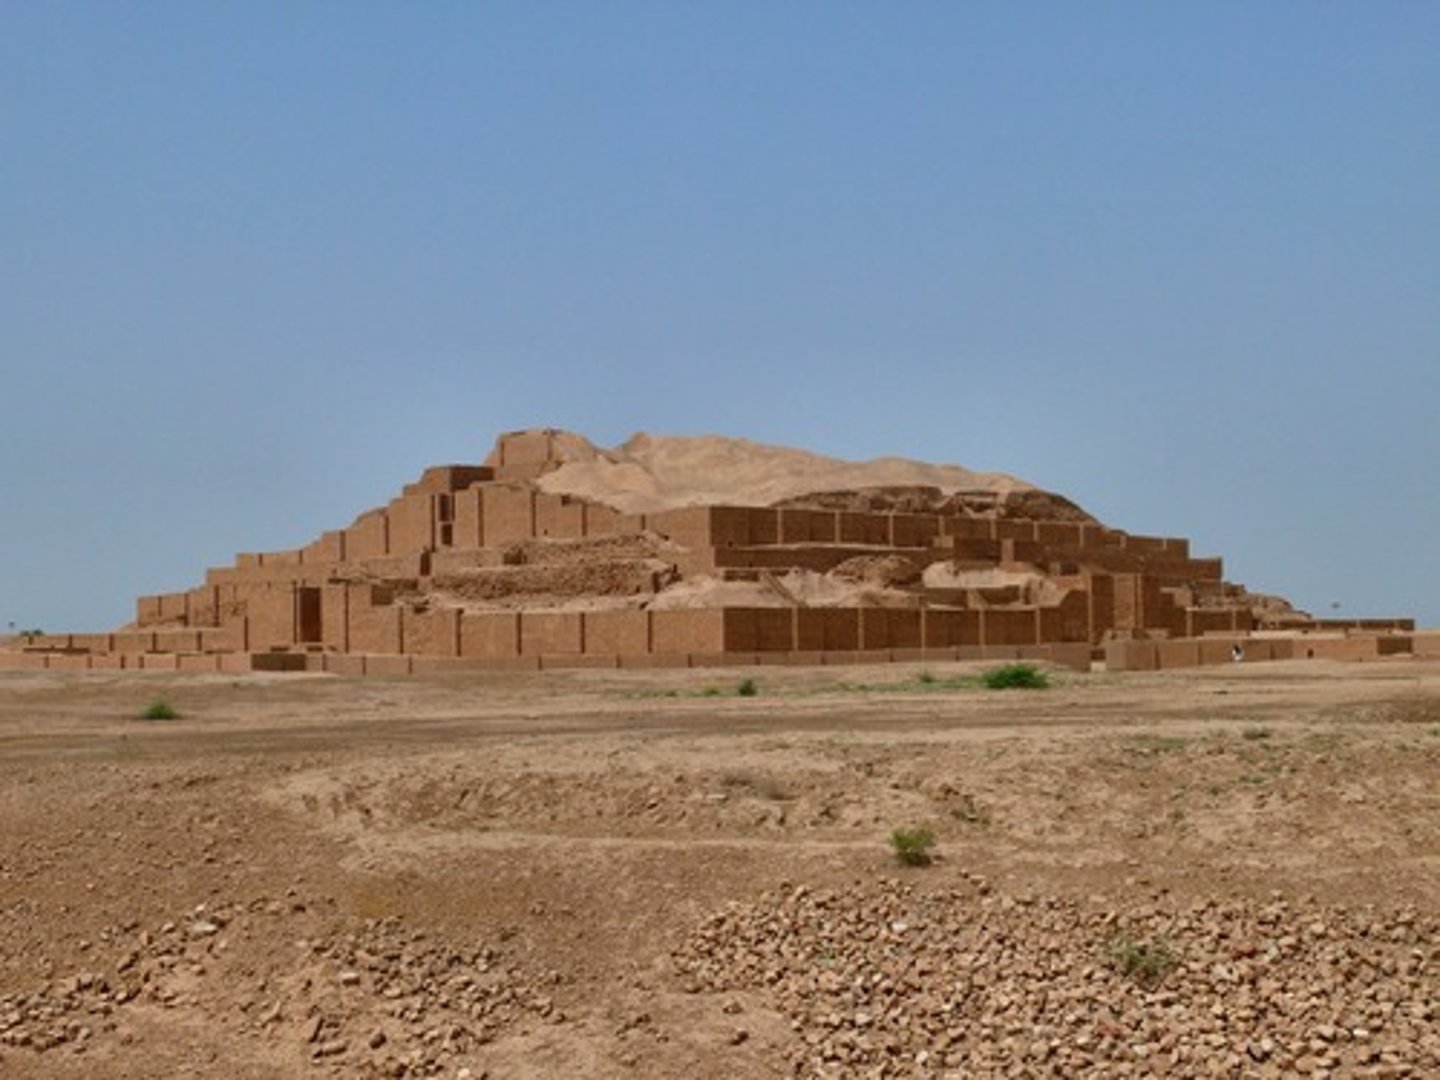 <p>an ancient Sumerian city in Southern Iraq, near the Euphrates, important before 2000 b.c. : exclusive archaeological excavations, notably of a ziggurat and of tablets with very early Sumerian script.</p>